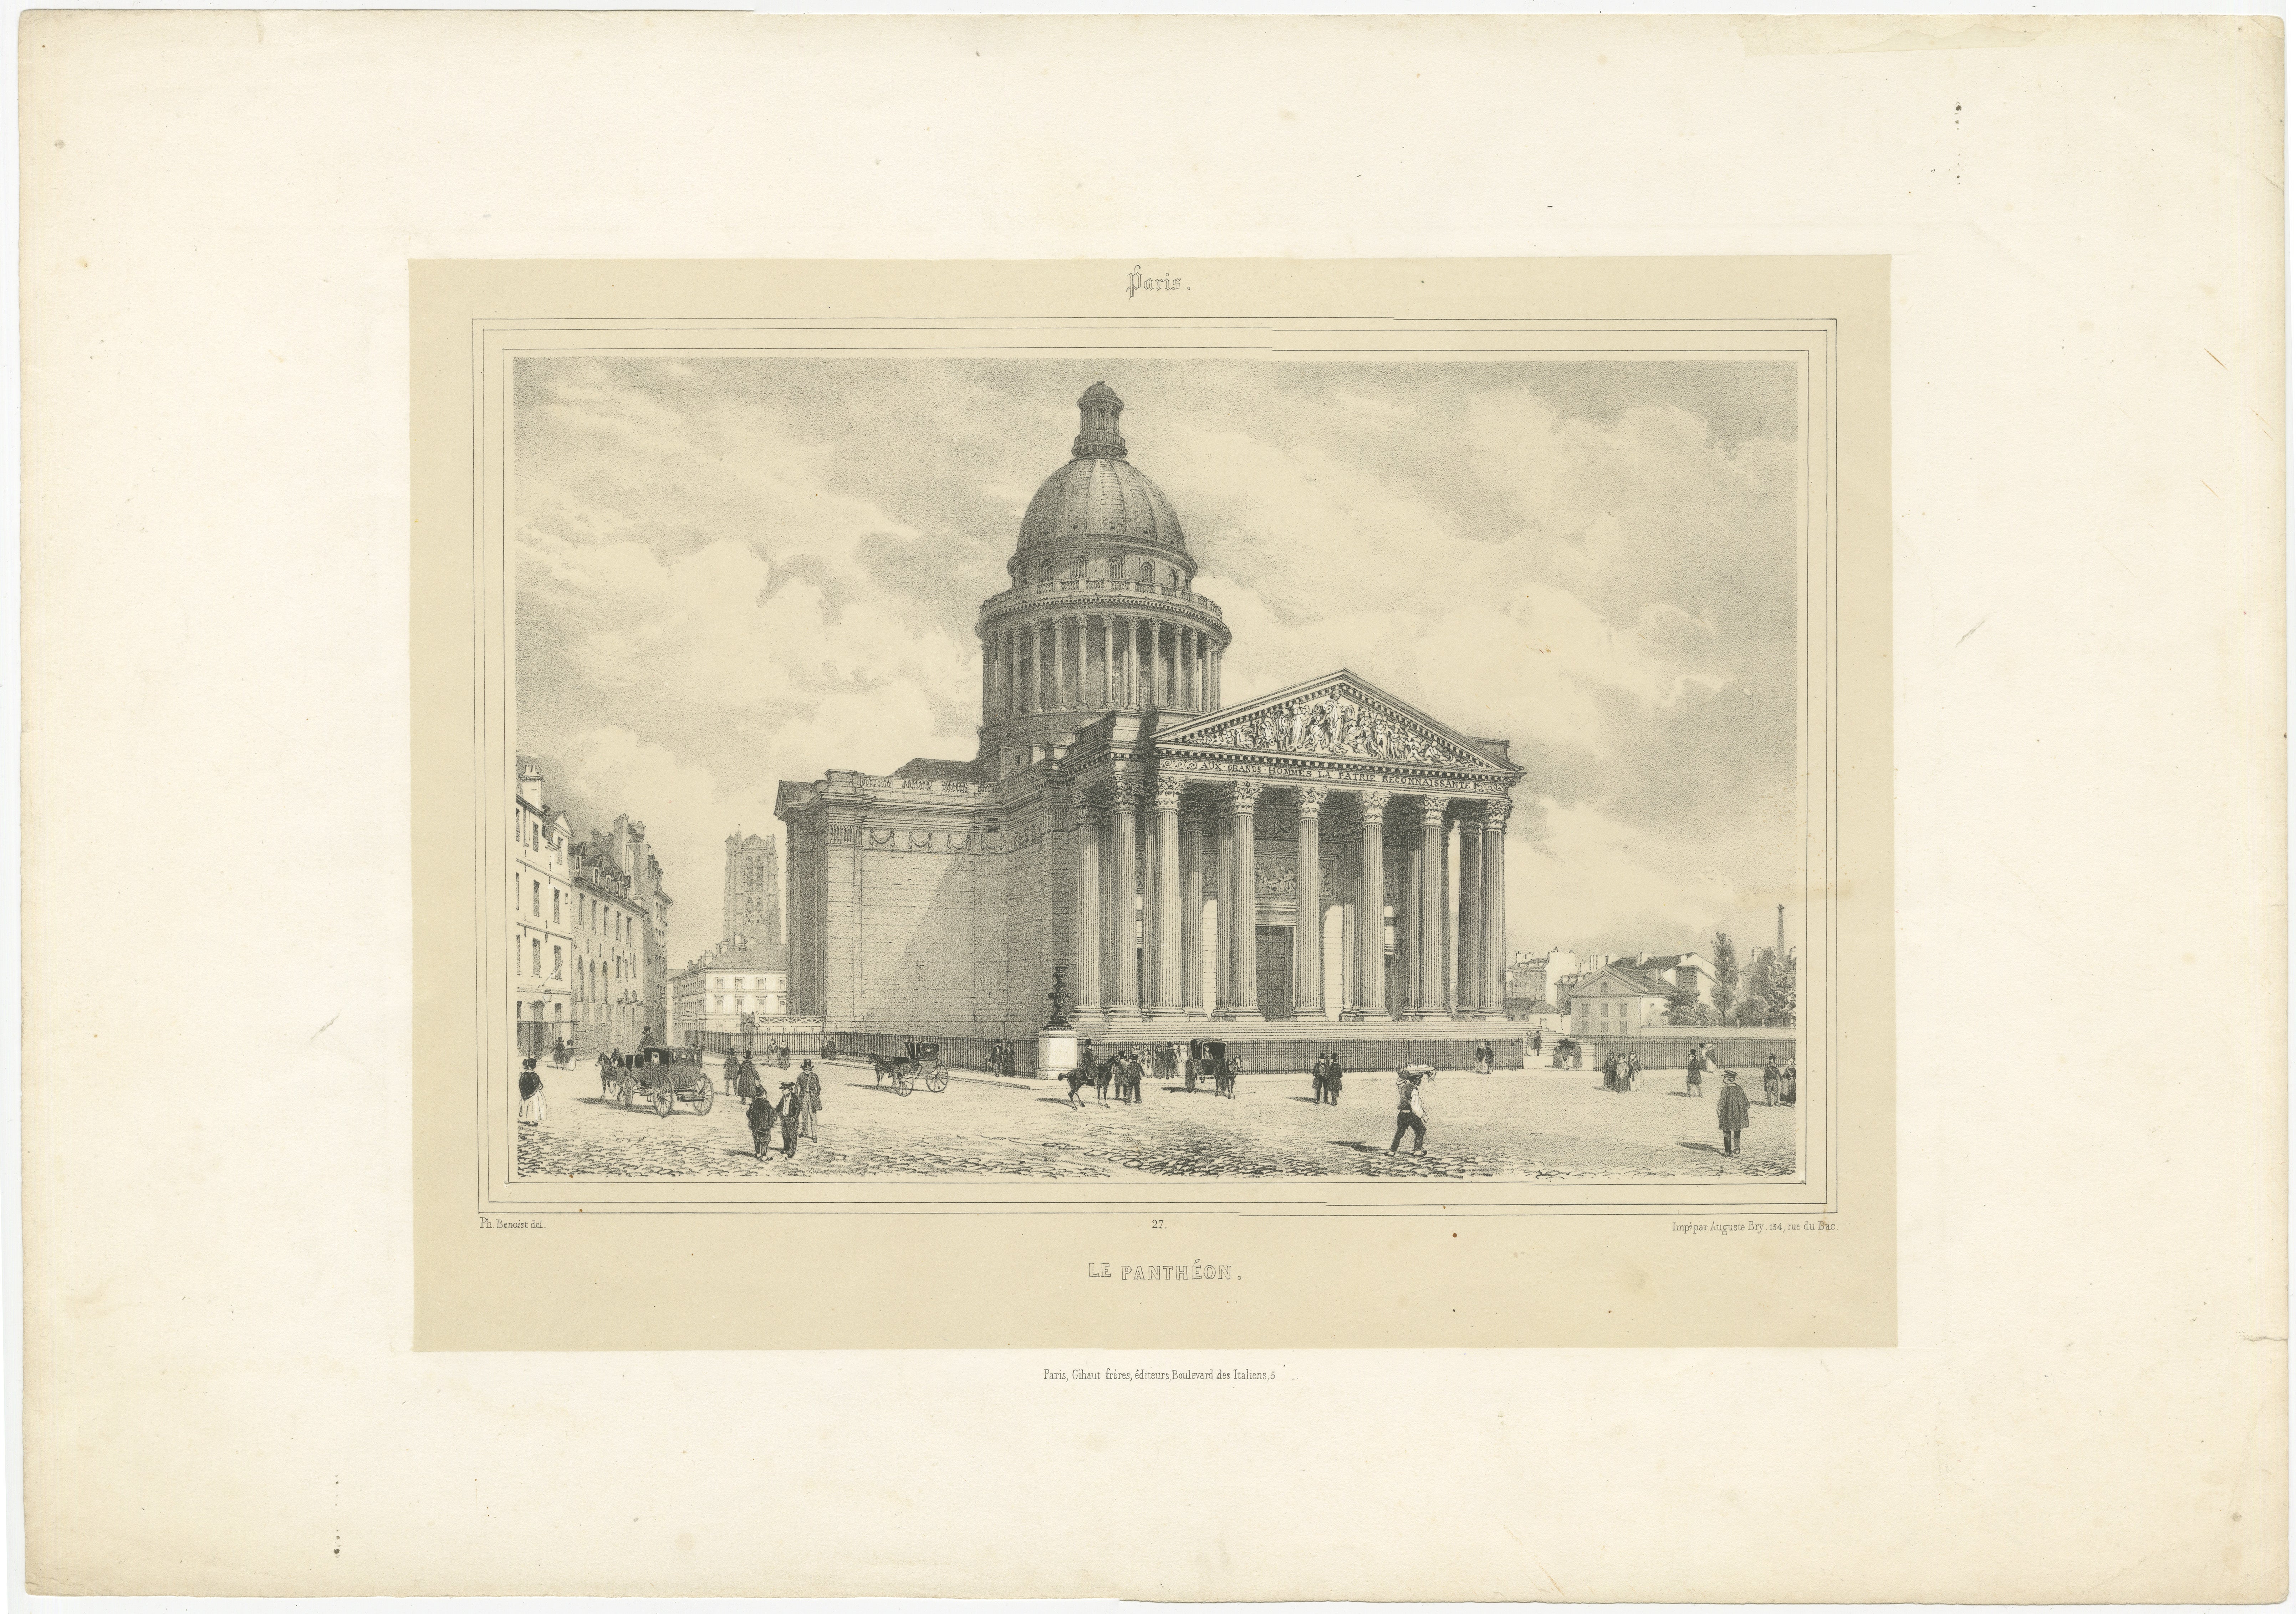 The image is an engraving of the Panthéon in Paris, created by Auguste Bry (1805–1880) and Philippe Benoist (1813–). 

The Panthéon originally served as a church dedicated to St. Genevieve but now functions as a mausoleum containing the remains of